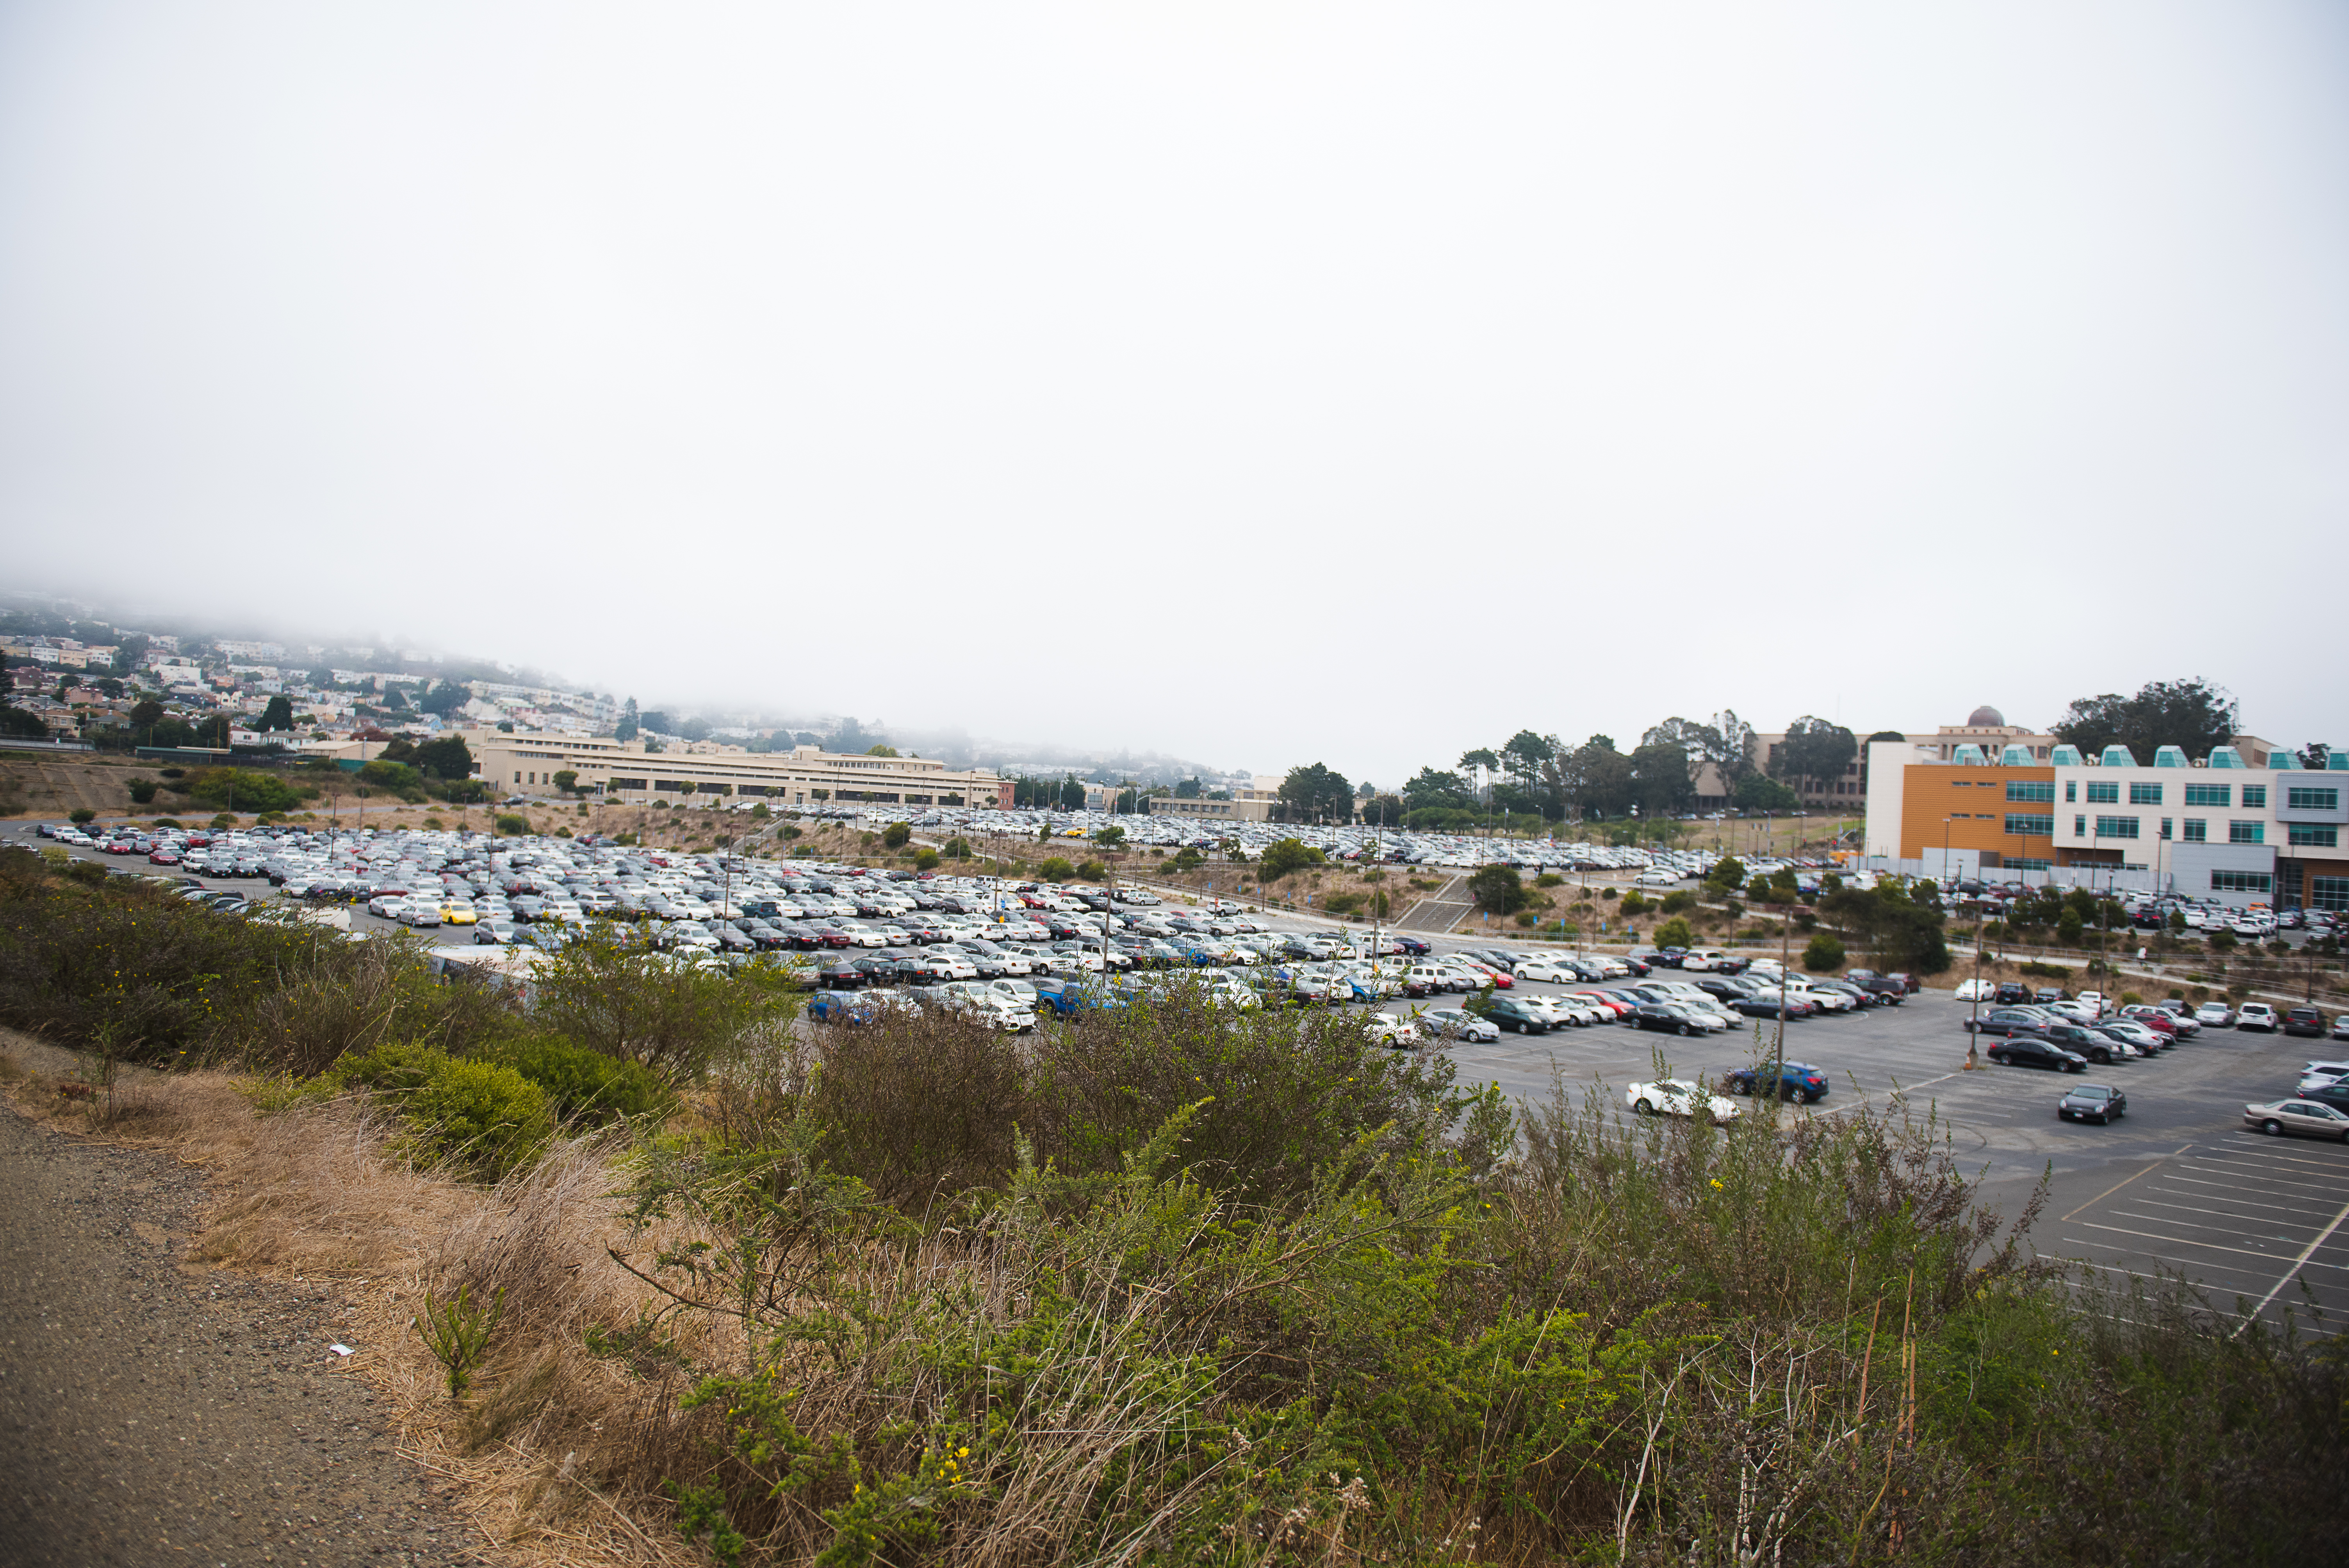 View of far end of Balboa Reservoir parking area at 9:30- out of frame portion is full. Taken Aug 28 2017 by Otto Pippenger.